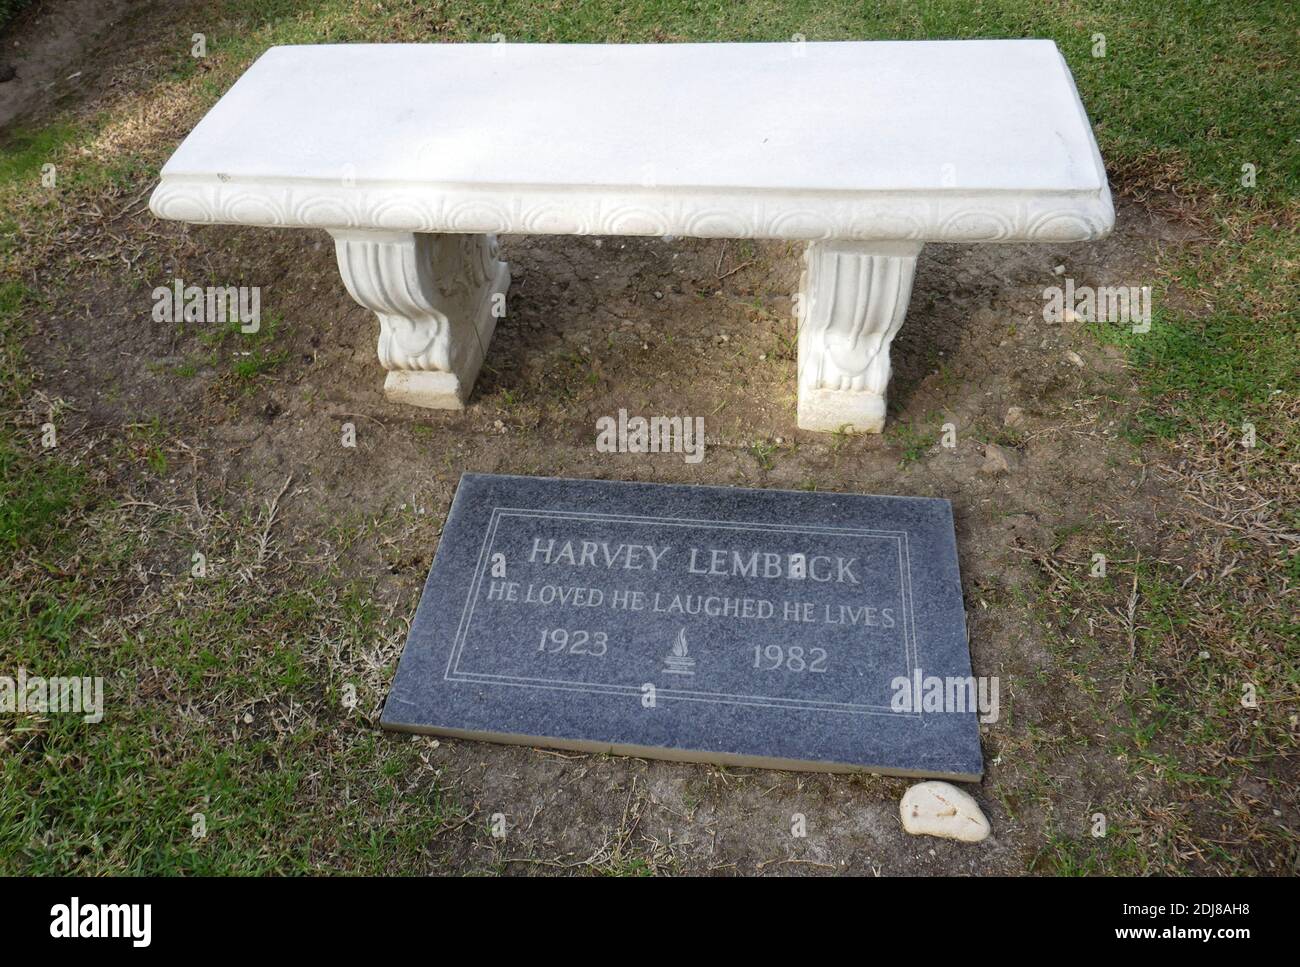 Mission Hills, California, USA 6th December 2020 A general view of atmosphere of actor Harvey Lembeck's grave in Mount Jerusalem section at Eden Memorial Park Cemetery on December 6, 2020 in Mission Hills, California, USA. Photo by Barry King/Alamy Stock Photo Stock Photo